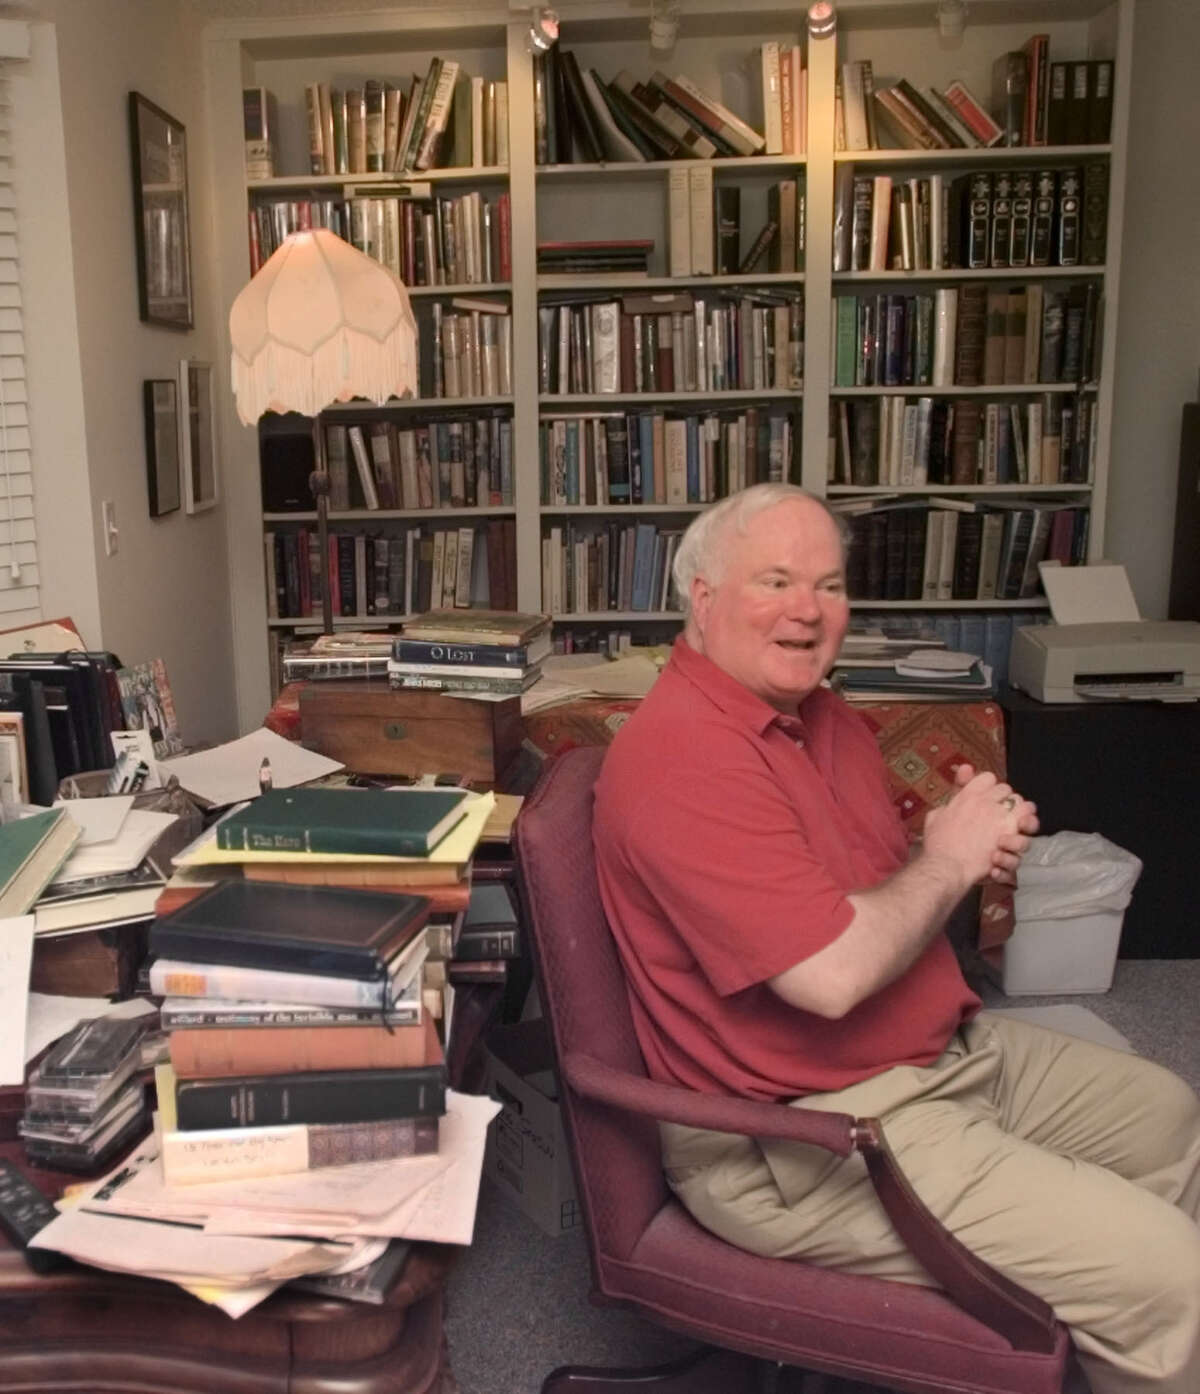 ADVANCE FOR SUNDAY, NOV. 19--Novelist Pat Conroy sits in his study at his home on Fripp Island, S.C., Nov. 3, 2000. Conroy's newest book, titled 'My Losing Season: A Point Guard's Way of Knowledge,' due out next year, is about his senior-year basketball team at The Citadel.